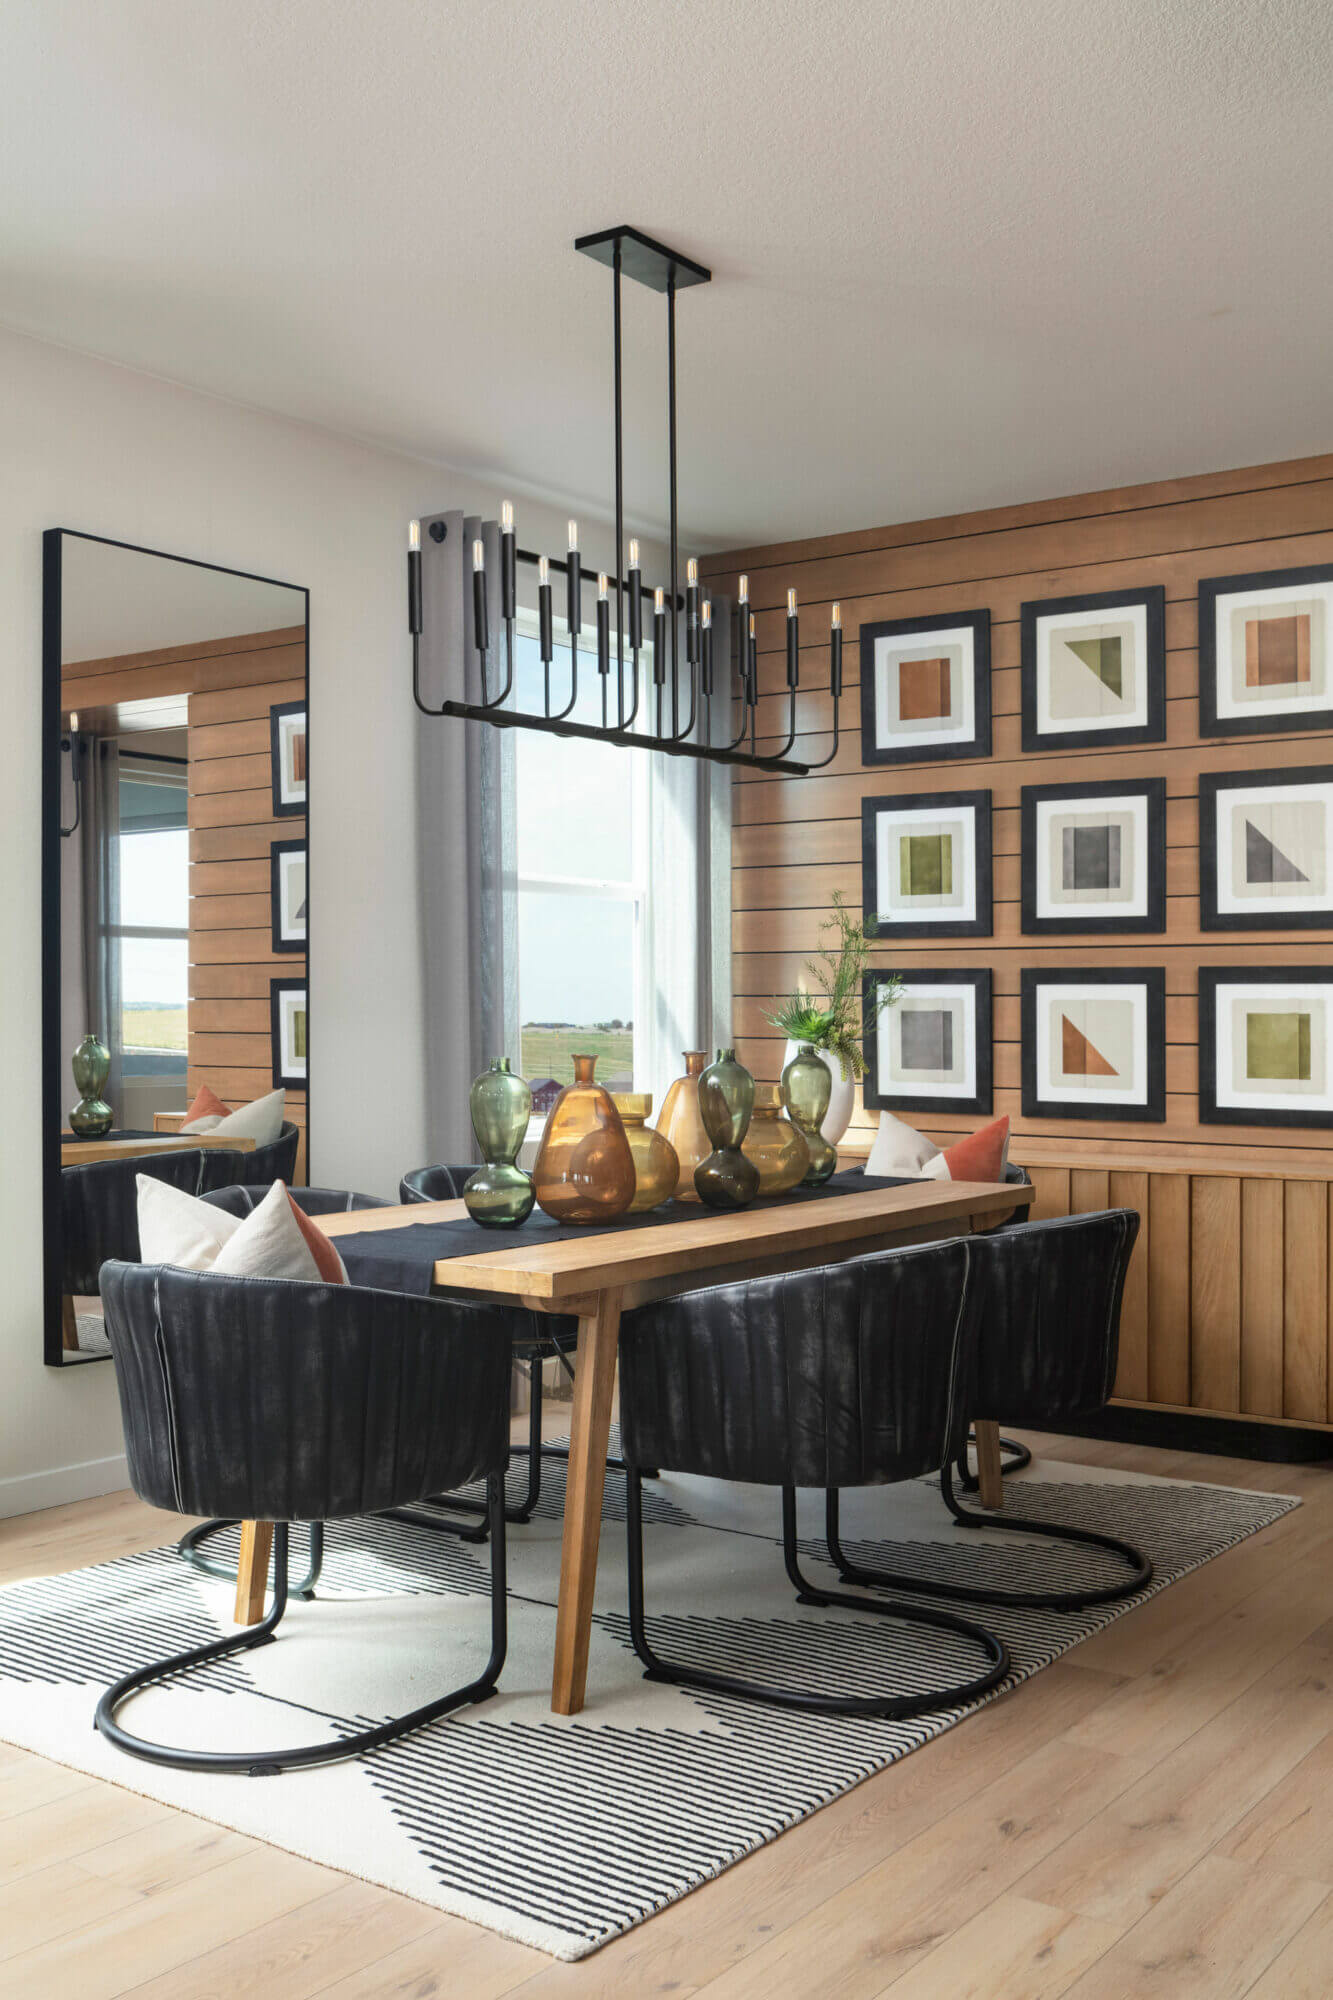 A dining room with a wood paneled wall.